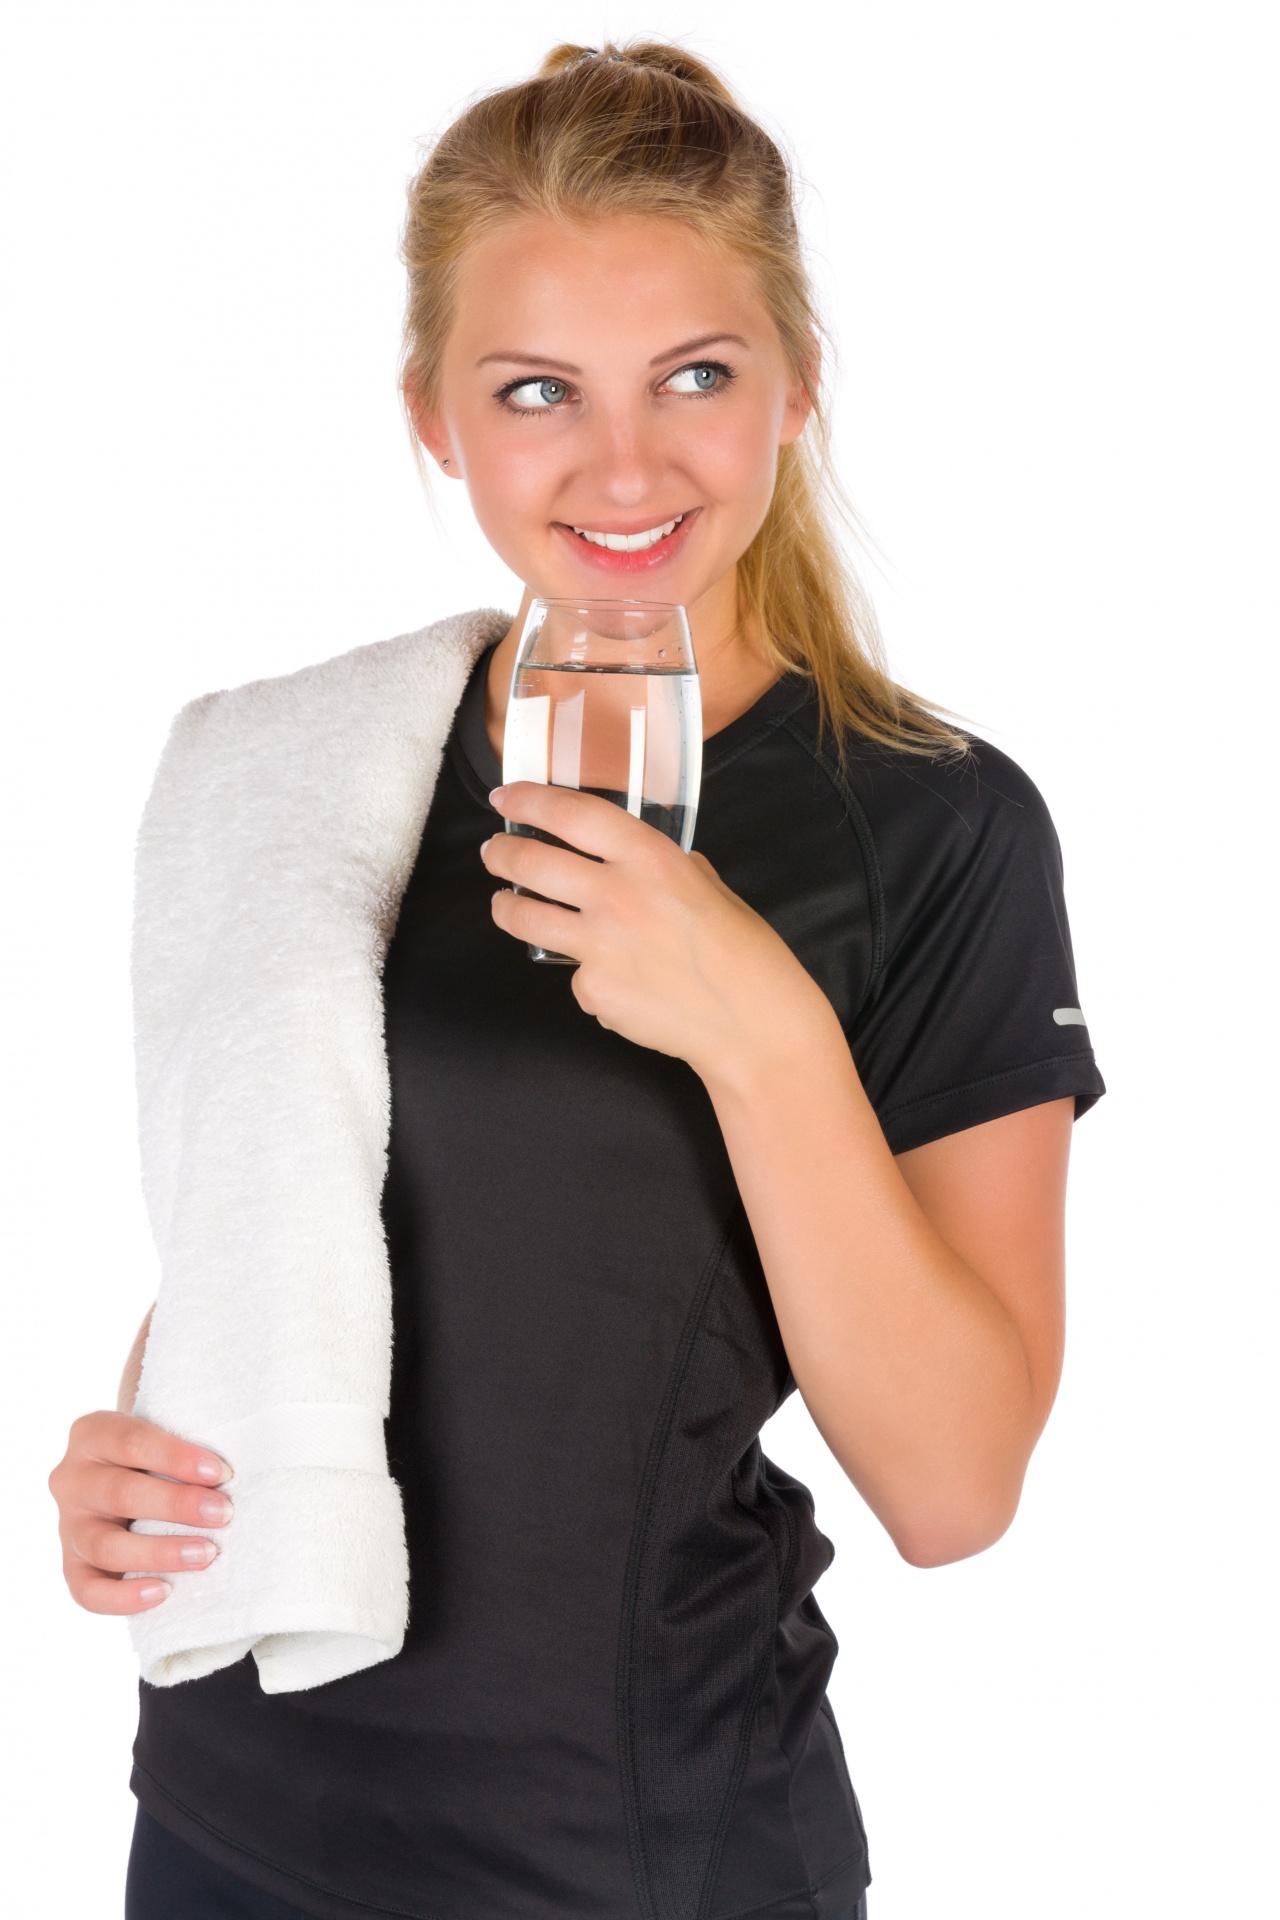 Fit Woman With Towel And Drink